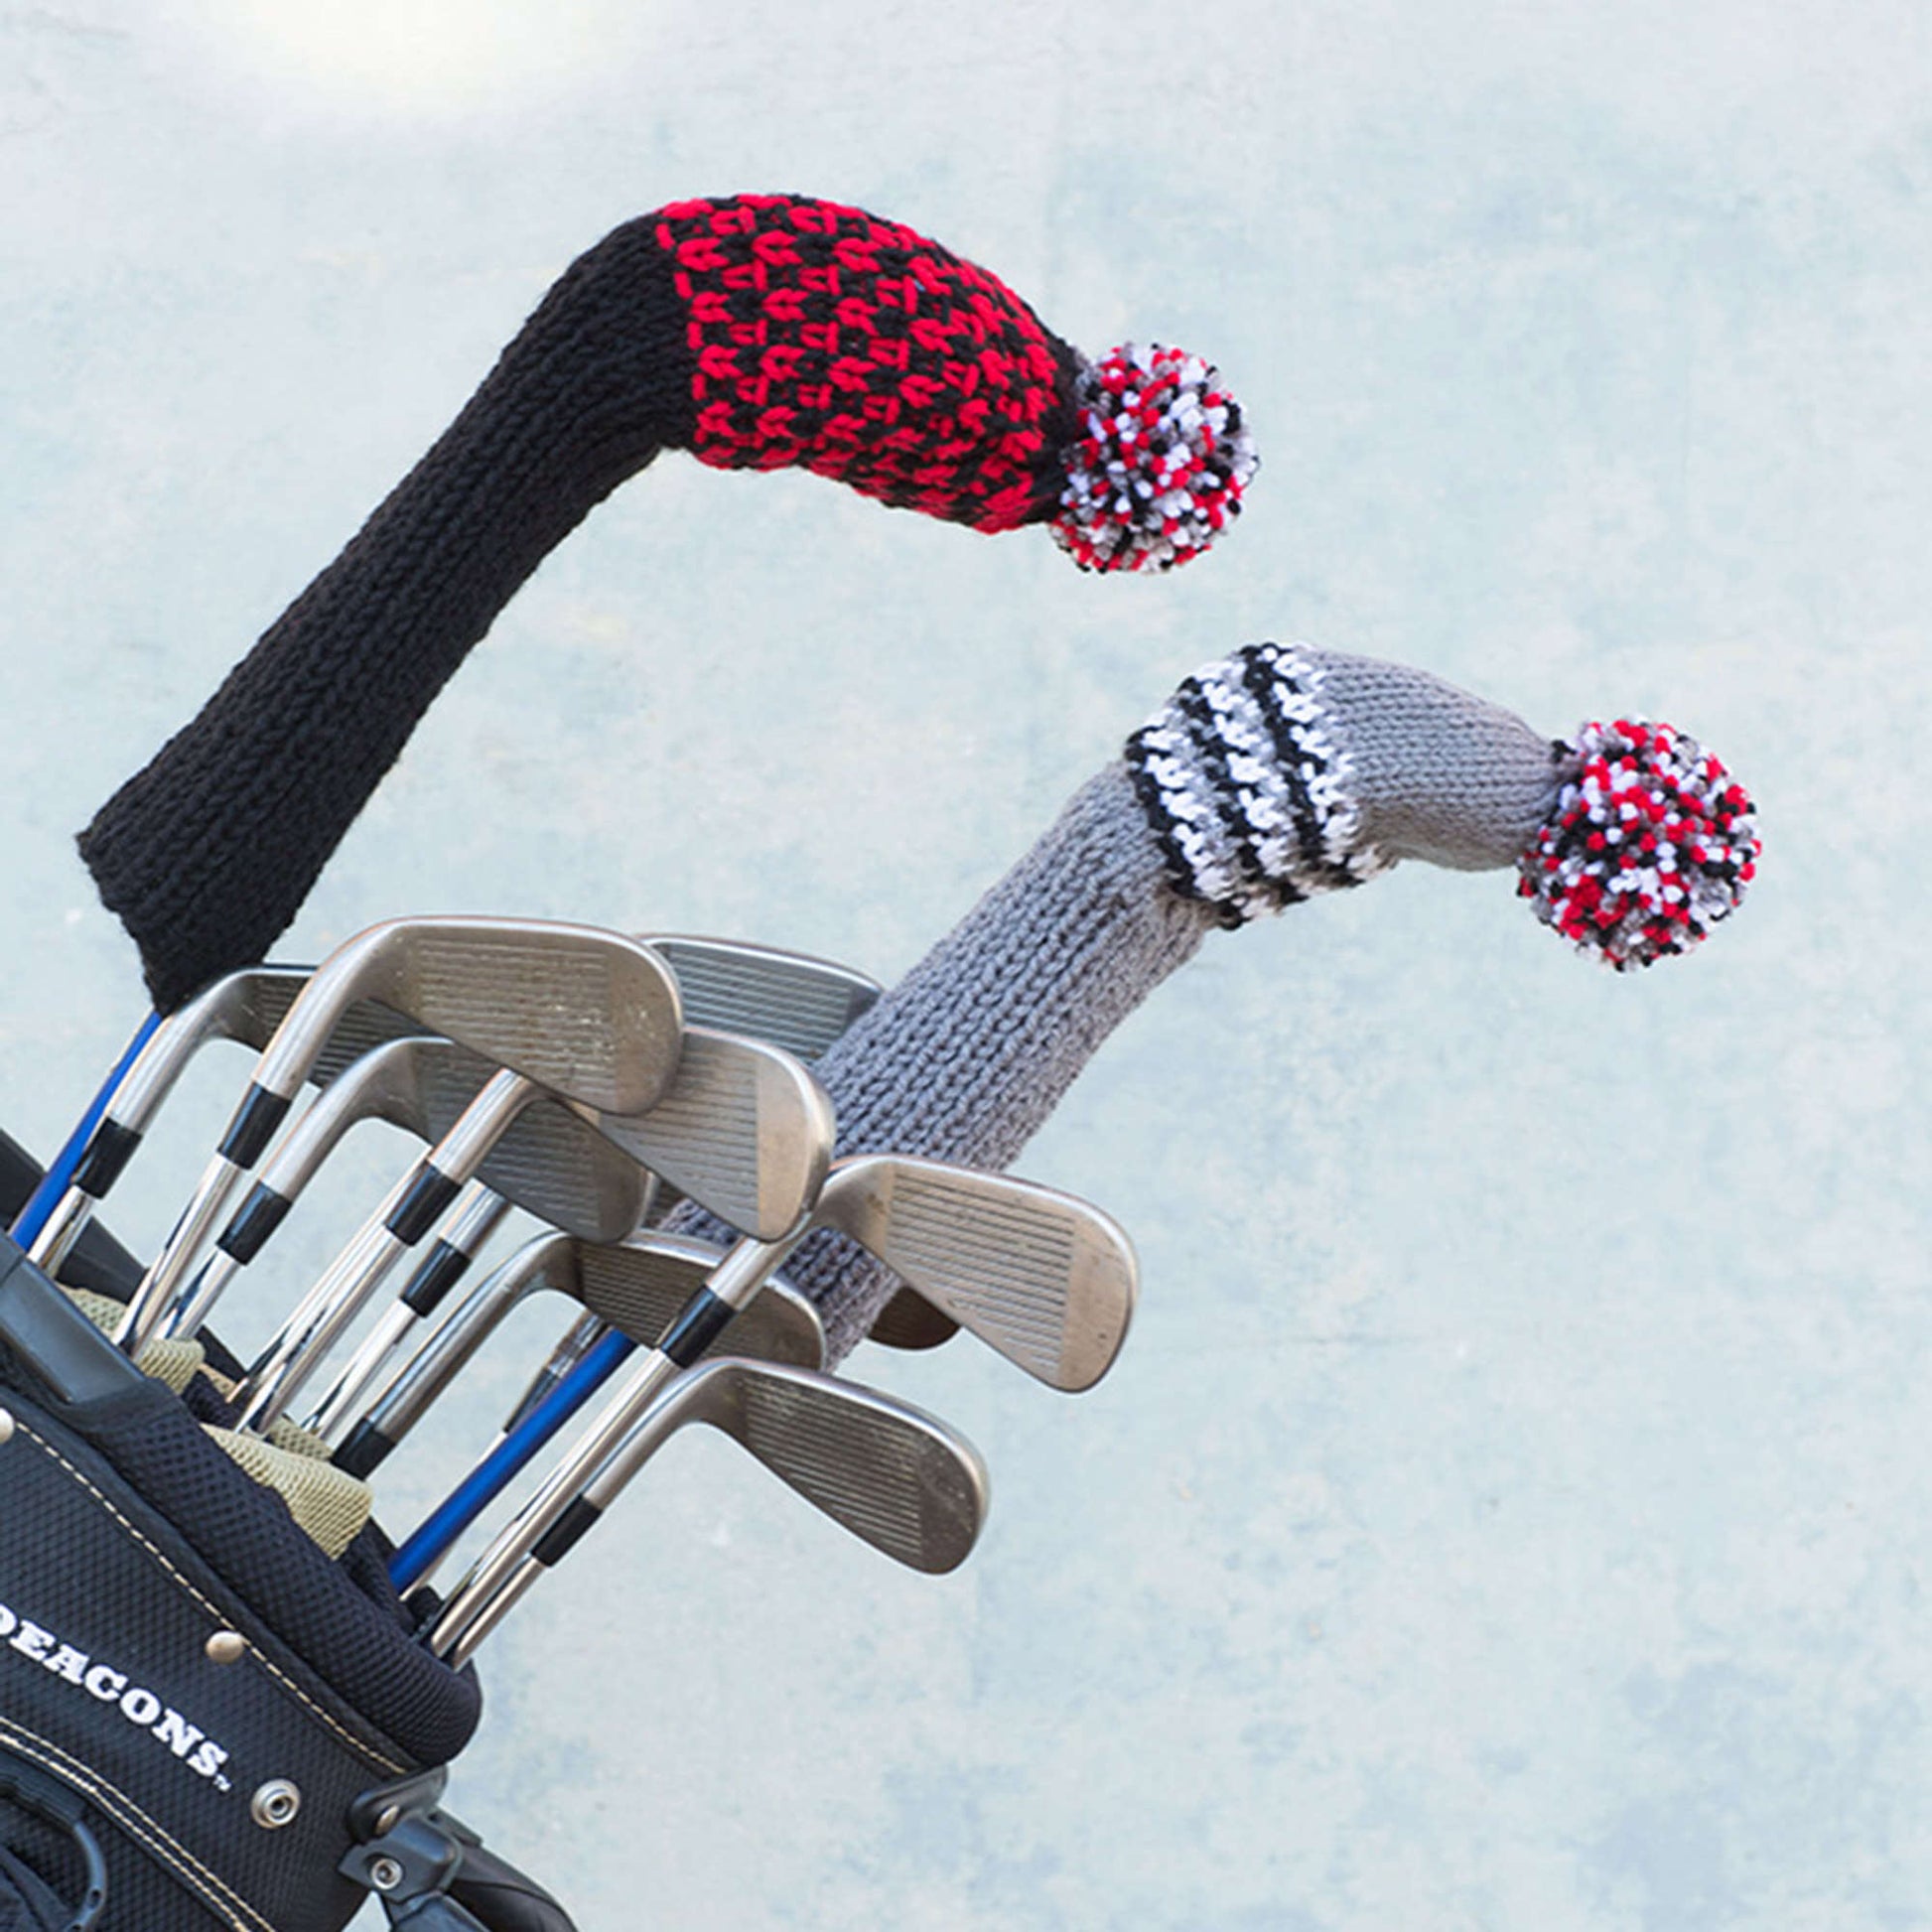 Free Red Heart Knit Golf Headcovers Pattern